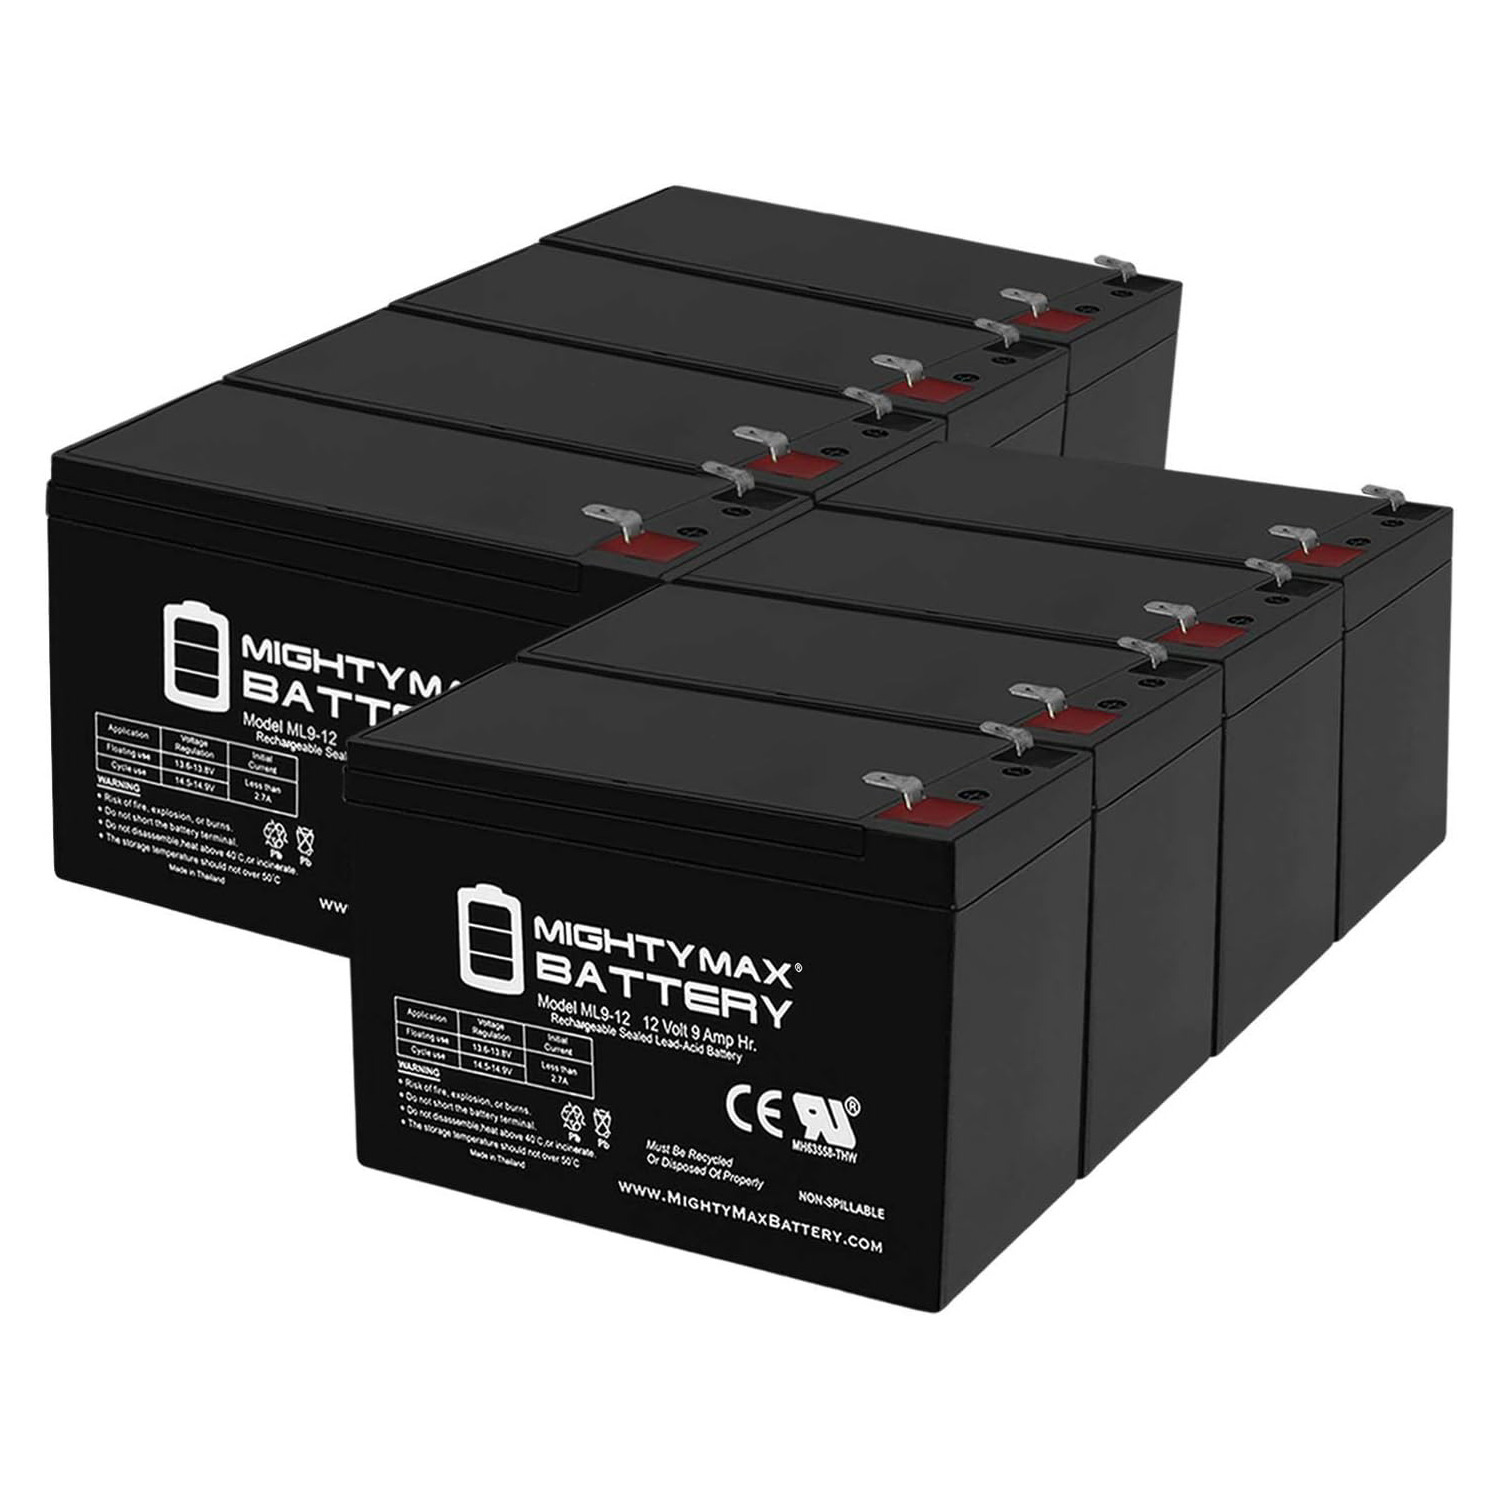 Altronix SMP5PMCTXPD4 12V, 9Ah Lead Acid Battery - 8 Pack